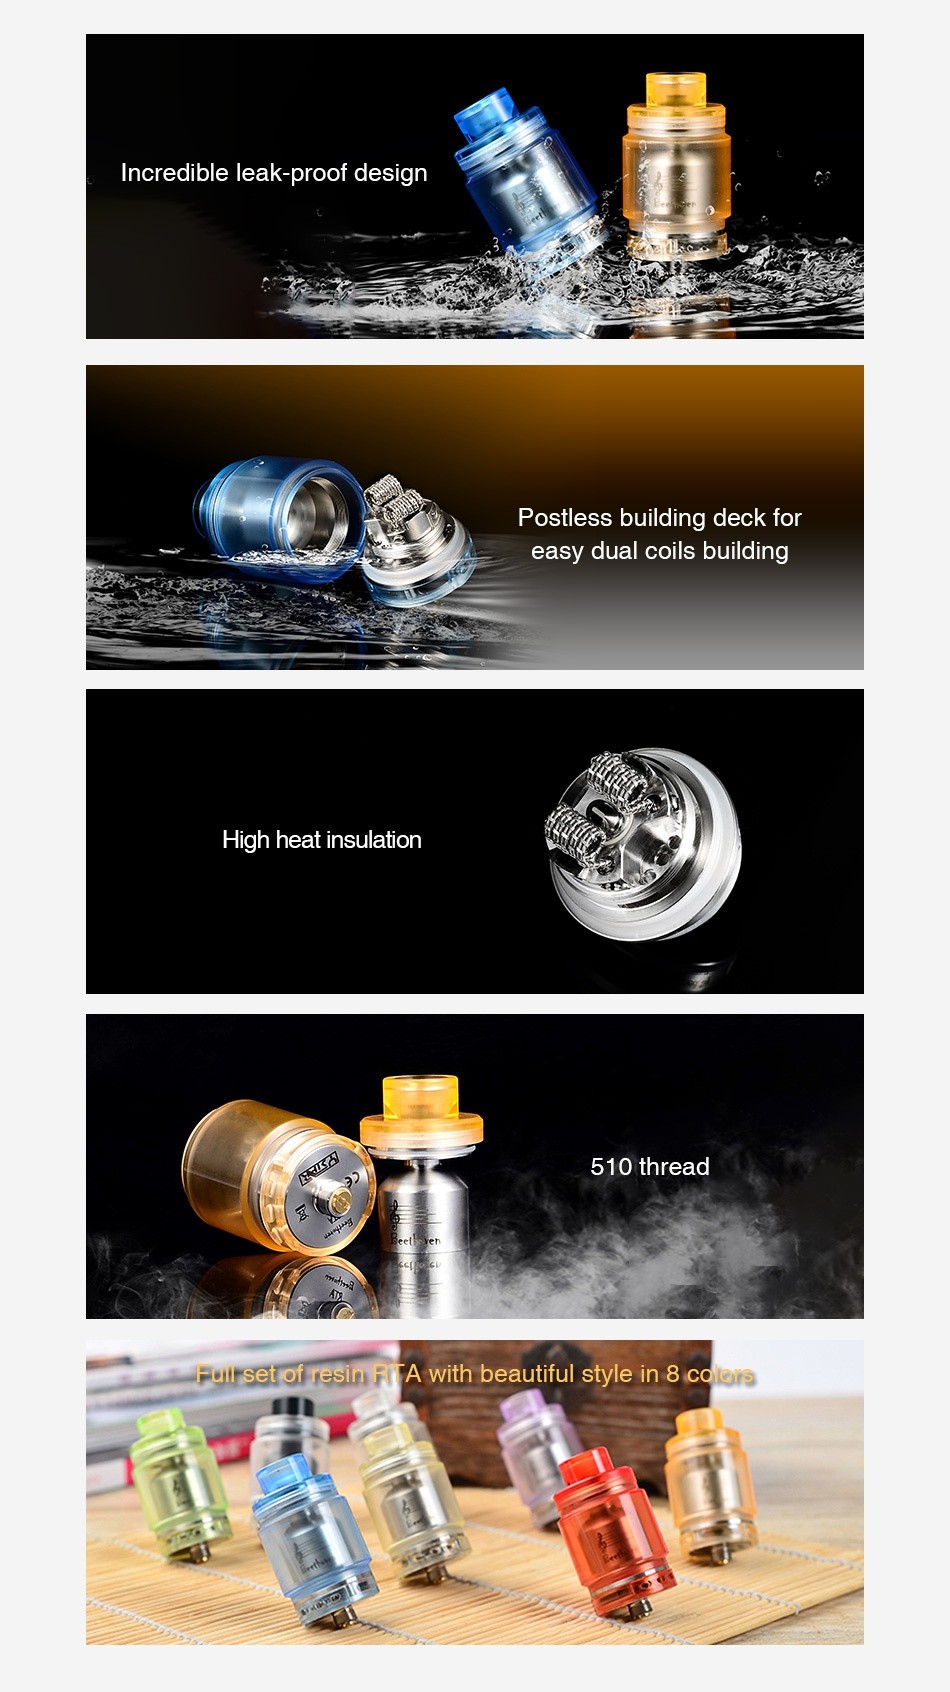 Ystar Beethoven RTA 5.5ml credible leak proof design Postless building deck for easy dual coils building High heat insulation 10 thread Puirsetof resin FifA with beautiful style in 8 cdos